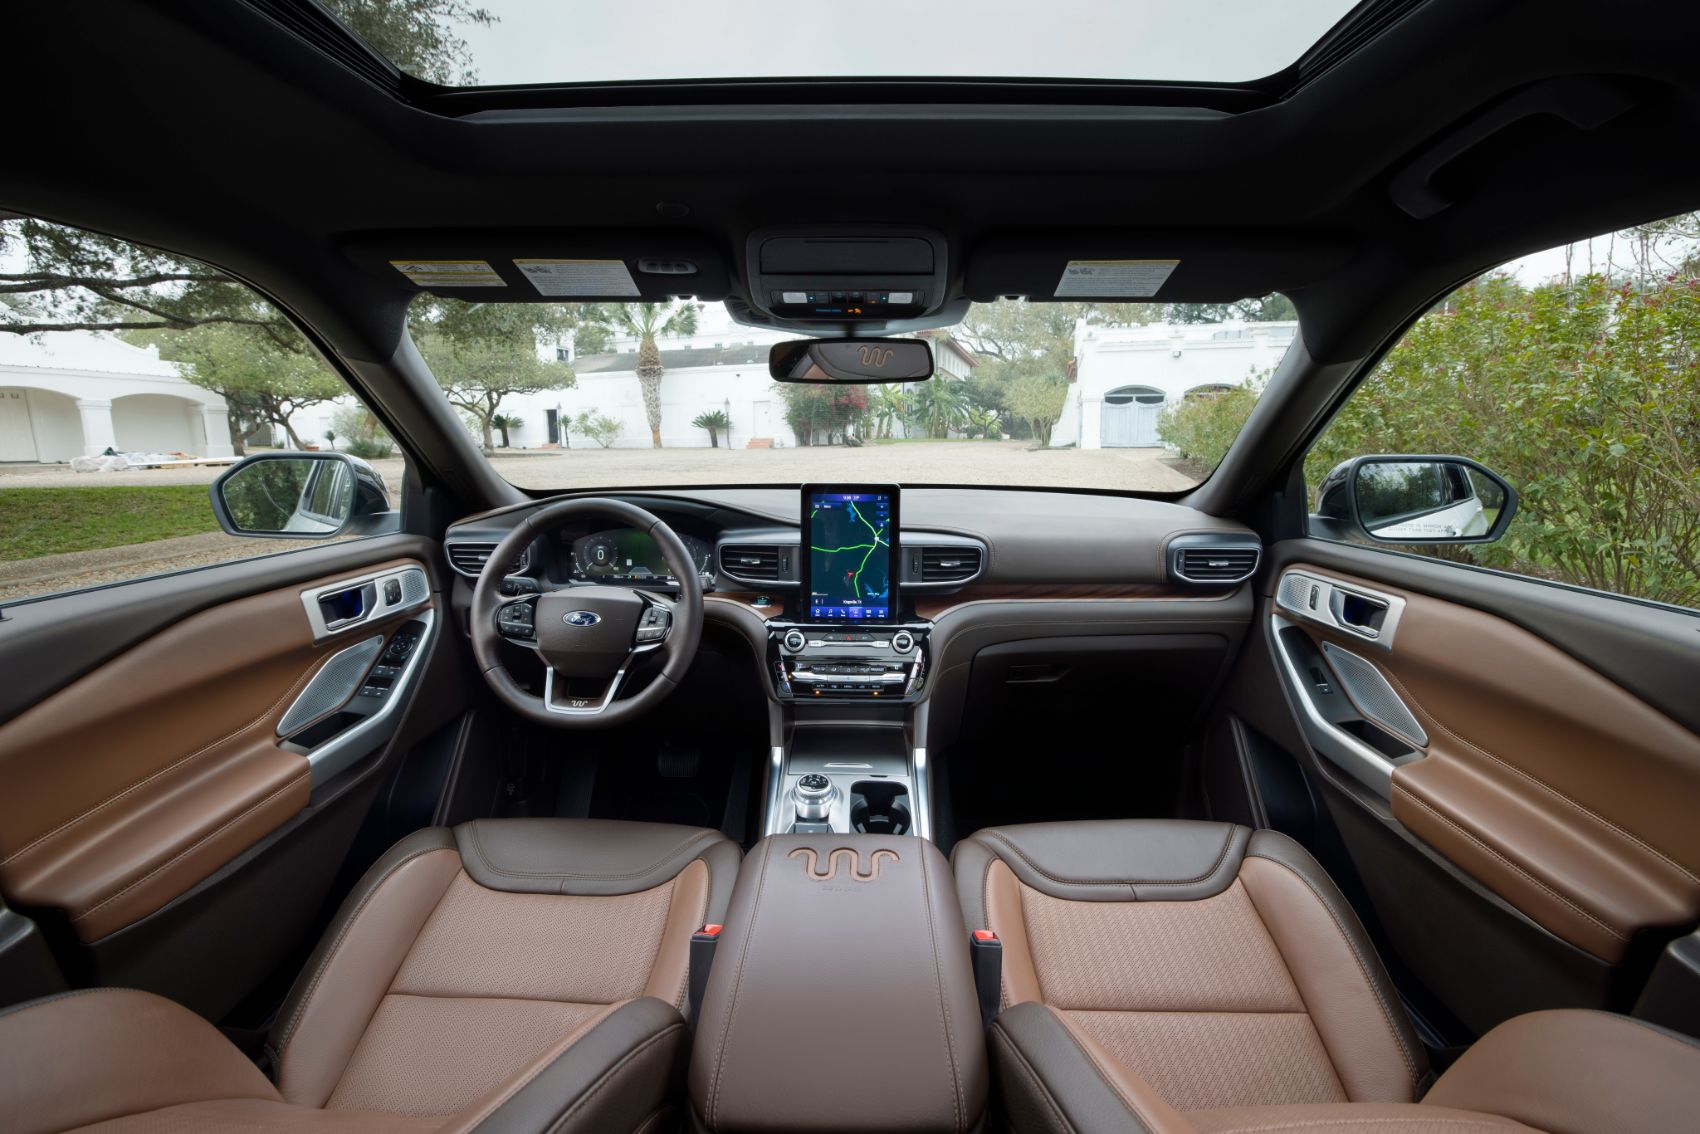 Ford Explorer King Ranch debuts with chic interiors and new technical